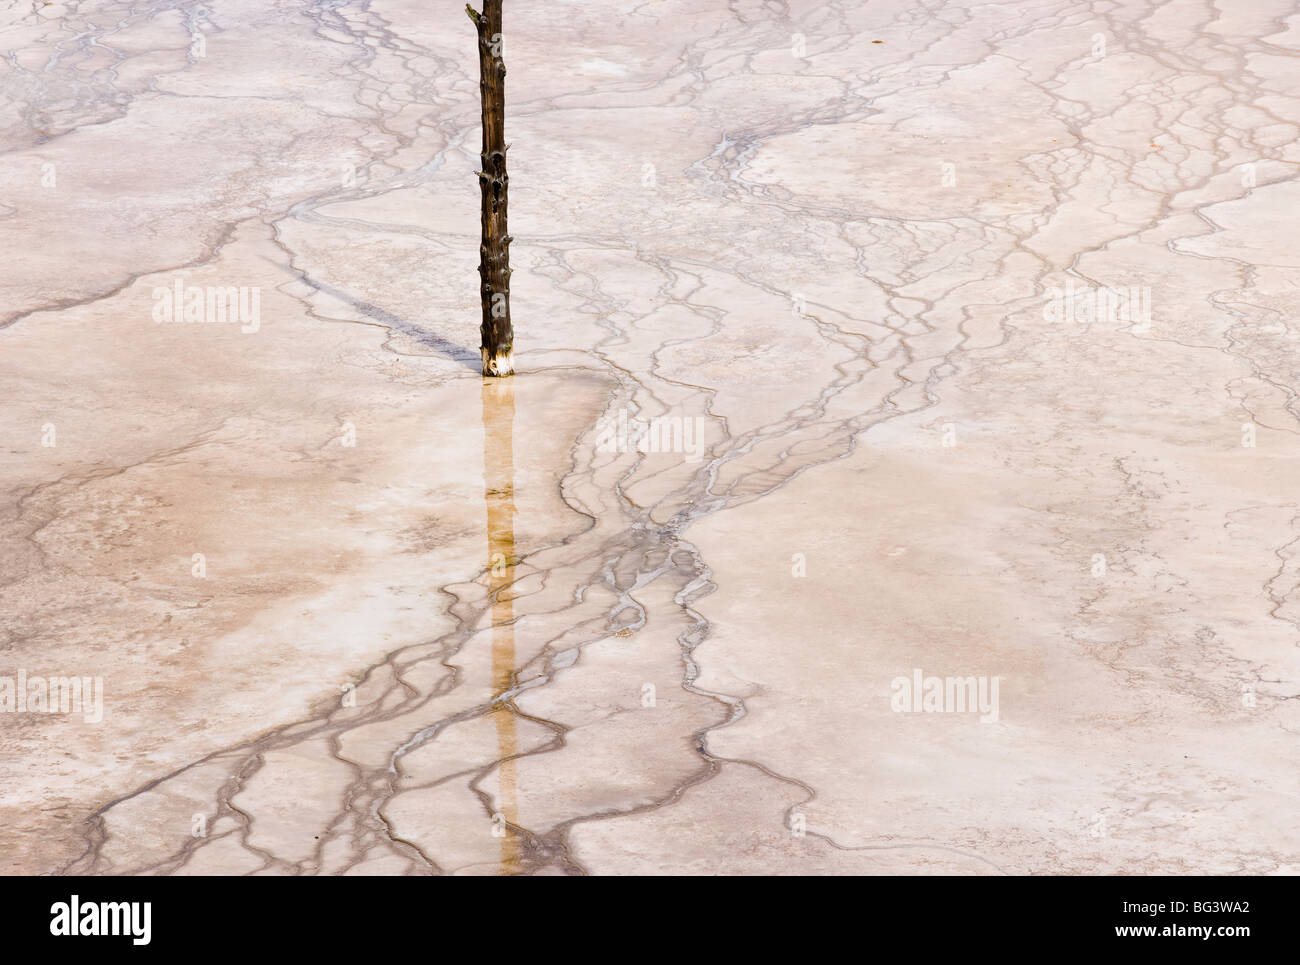 A detail view of the Grand Prismatic Springs bacterial mats in Yellowstone National Park, Wyoming, USA. Stock Photo